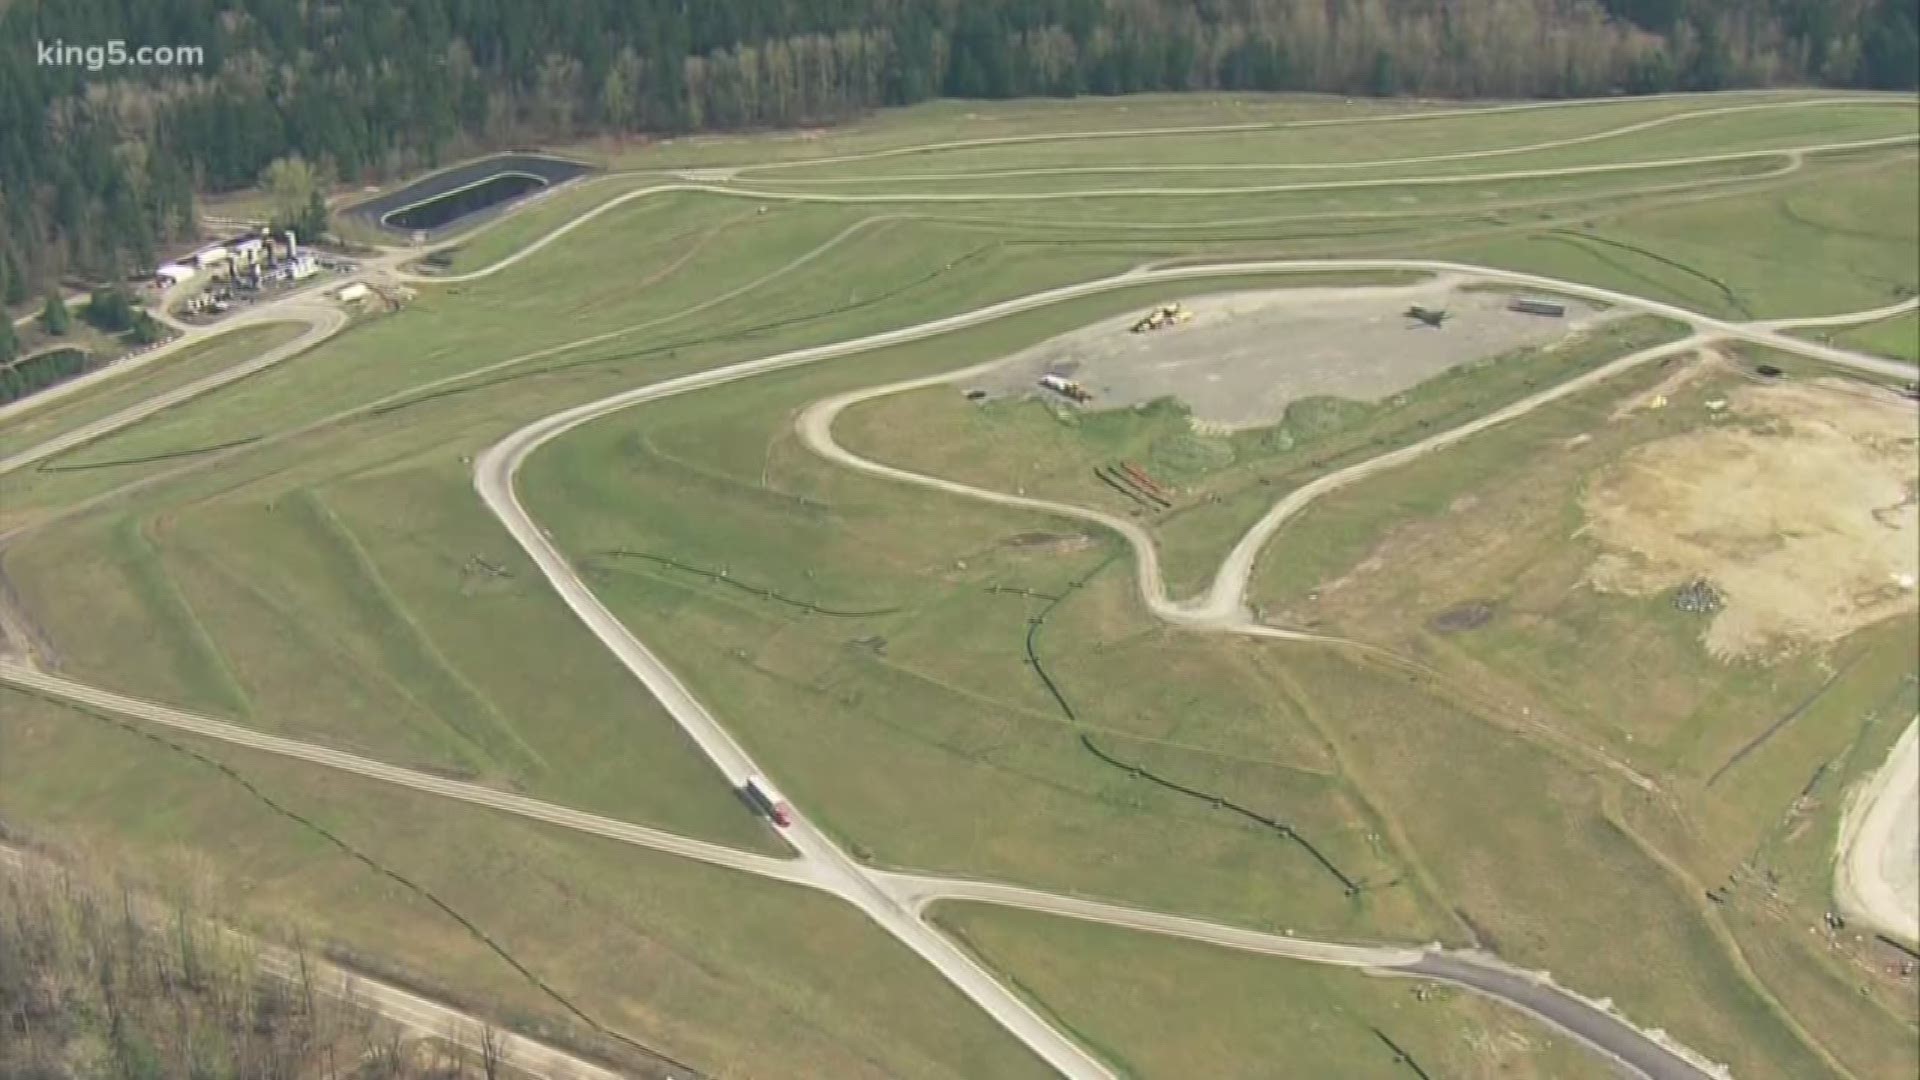 King County will allow a controversial landfill expansion. The County council approved the measure by a 5-2 vote today, despite loud complaints from neighbors. KING 5's Chris Daniel reports.